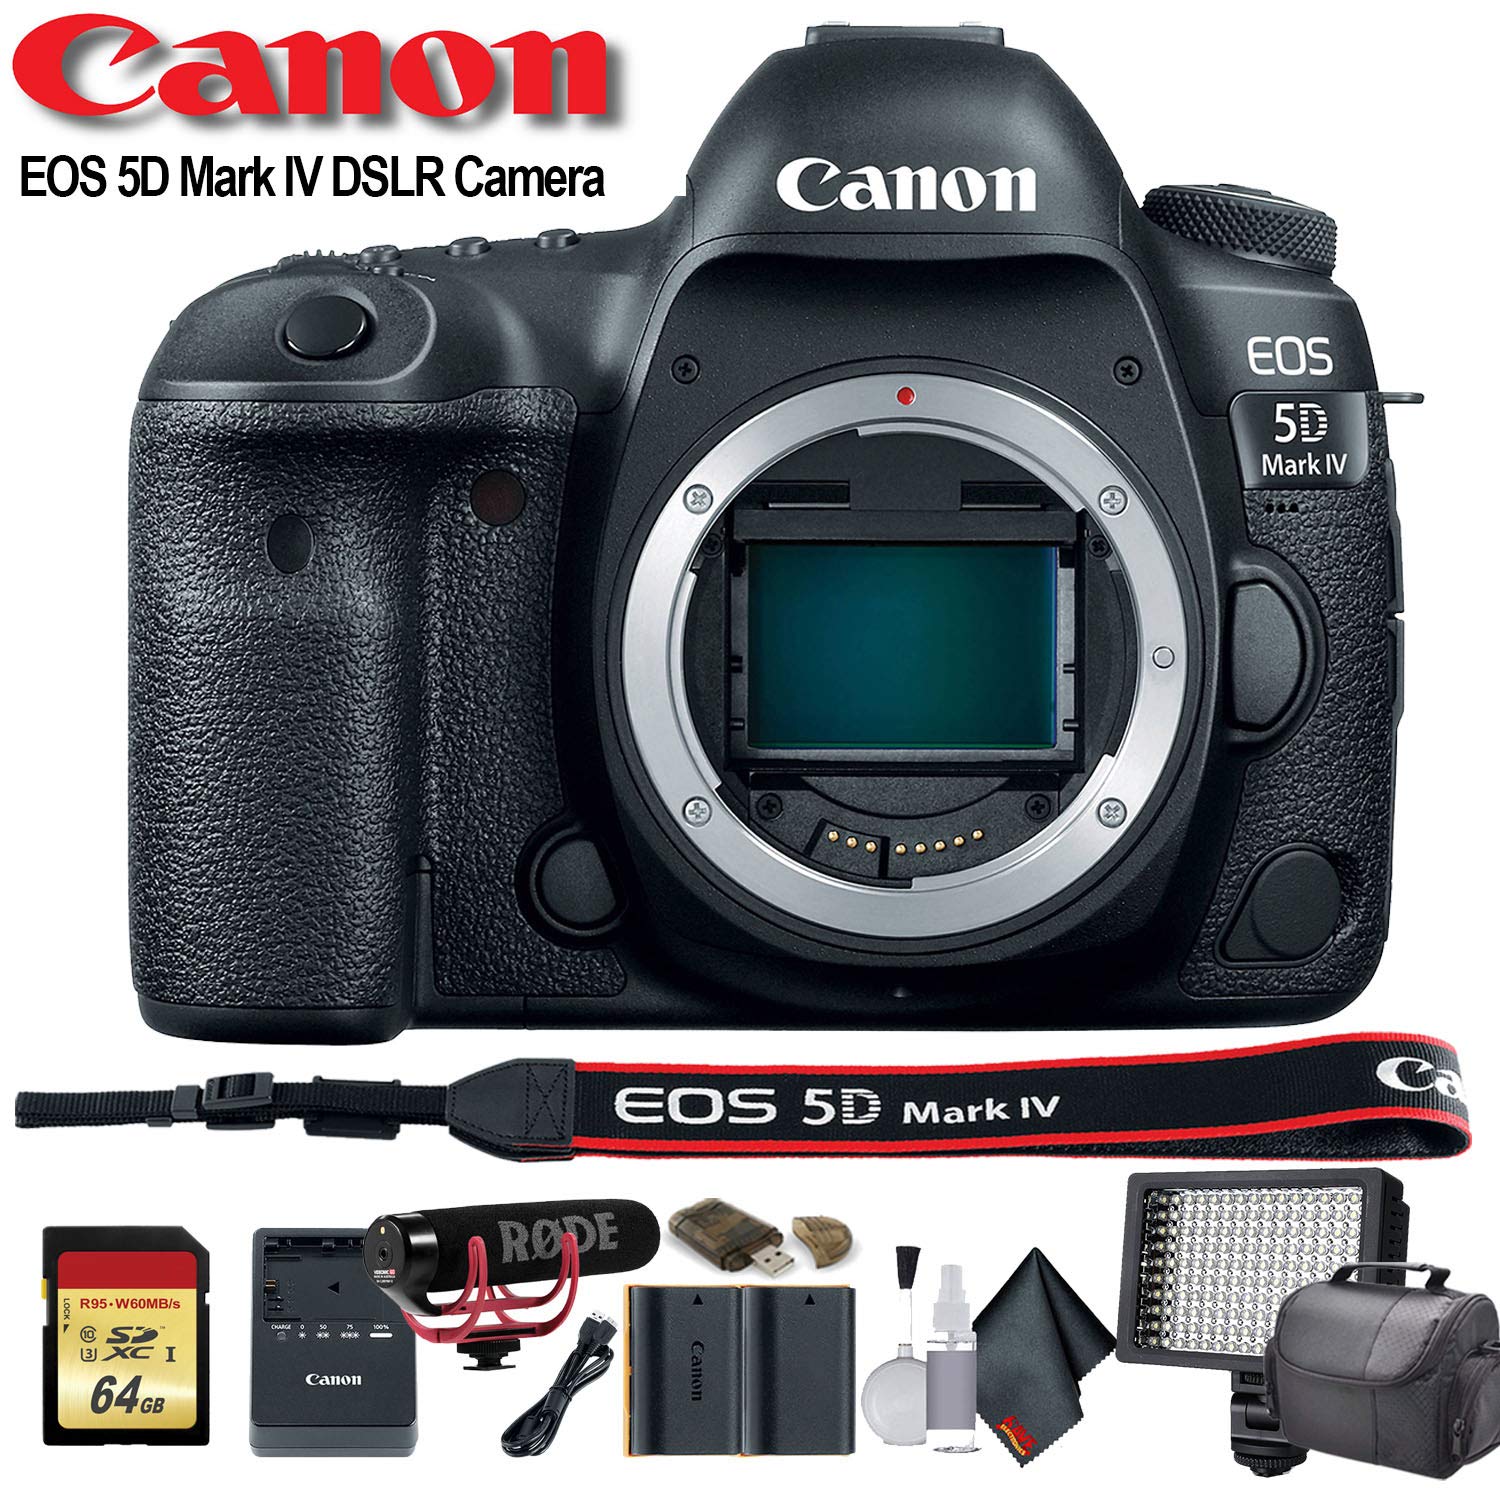 Canon EOS 5D Mark IV DSLR Camera (1483C002) W/Bag, Extra Battery, LED Light, Mic, Filters and More Bundle